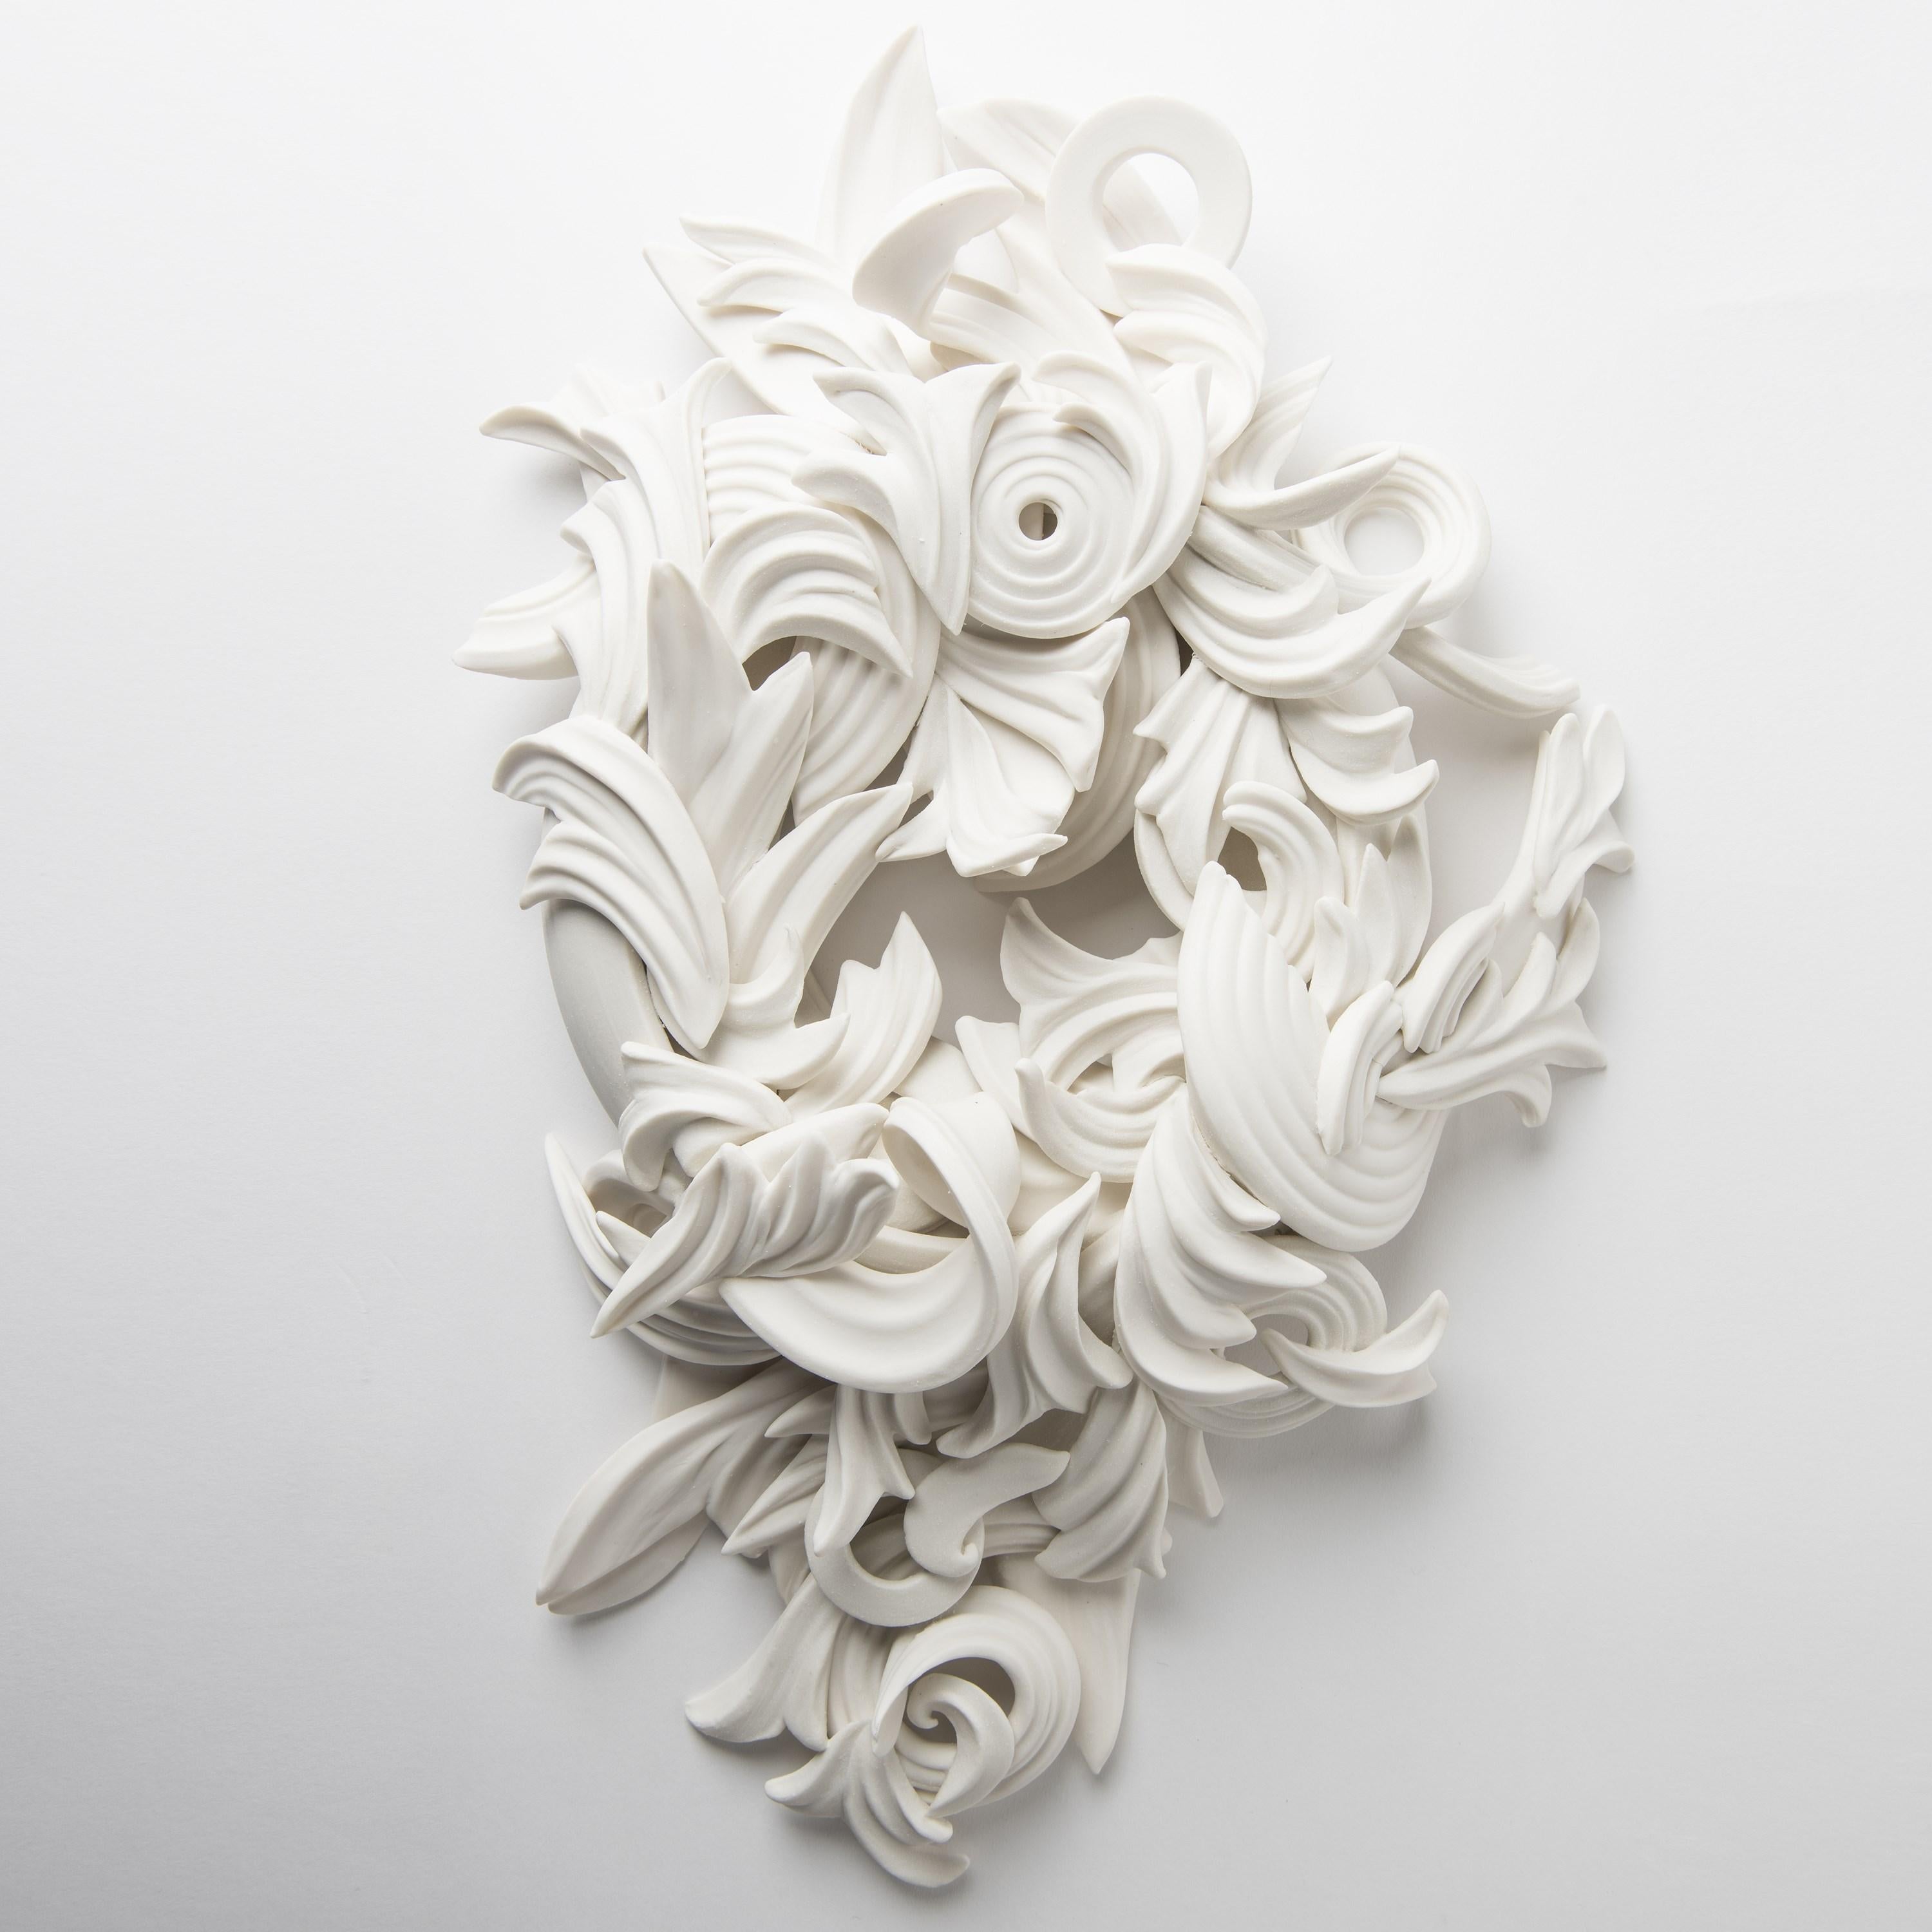 Organic Modern Cincture, a Unique Porcelain Architectural Wall Installation by Jo Taylor For Sale